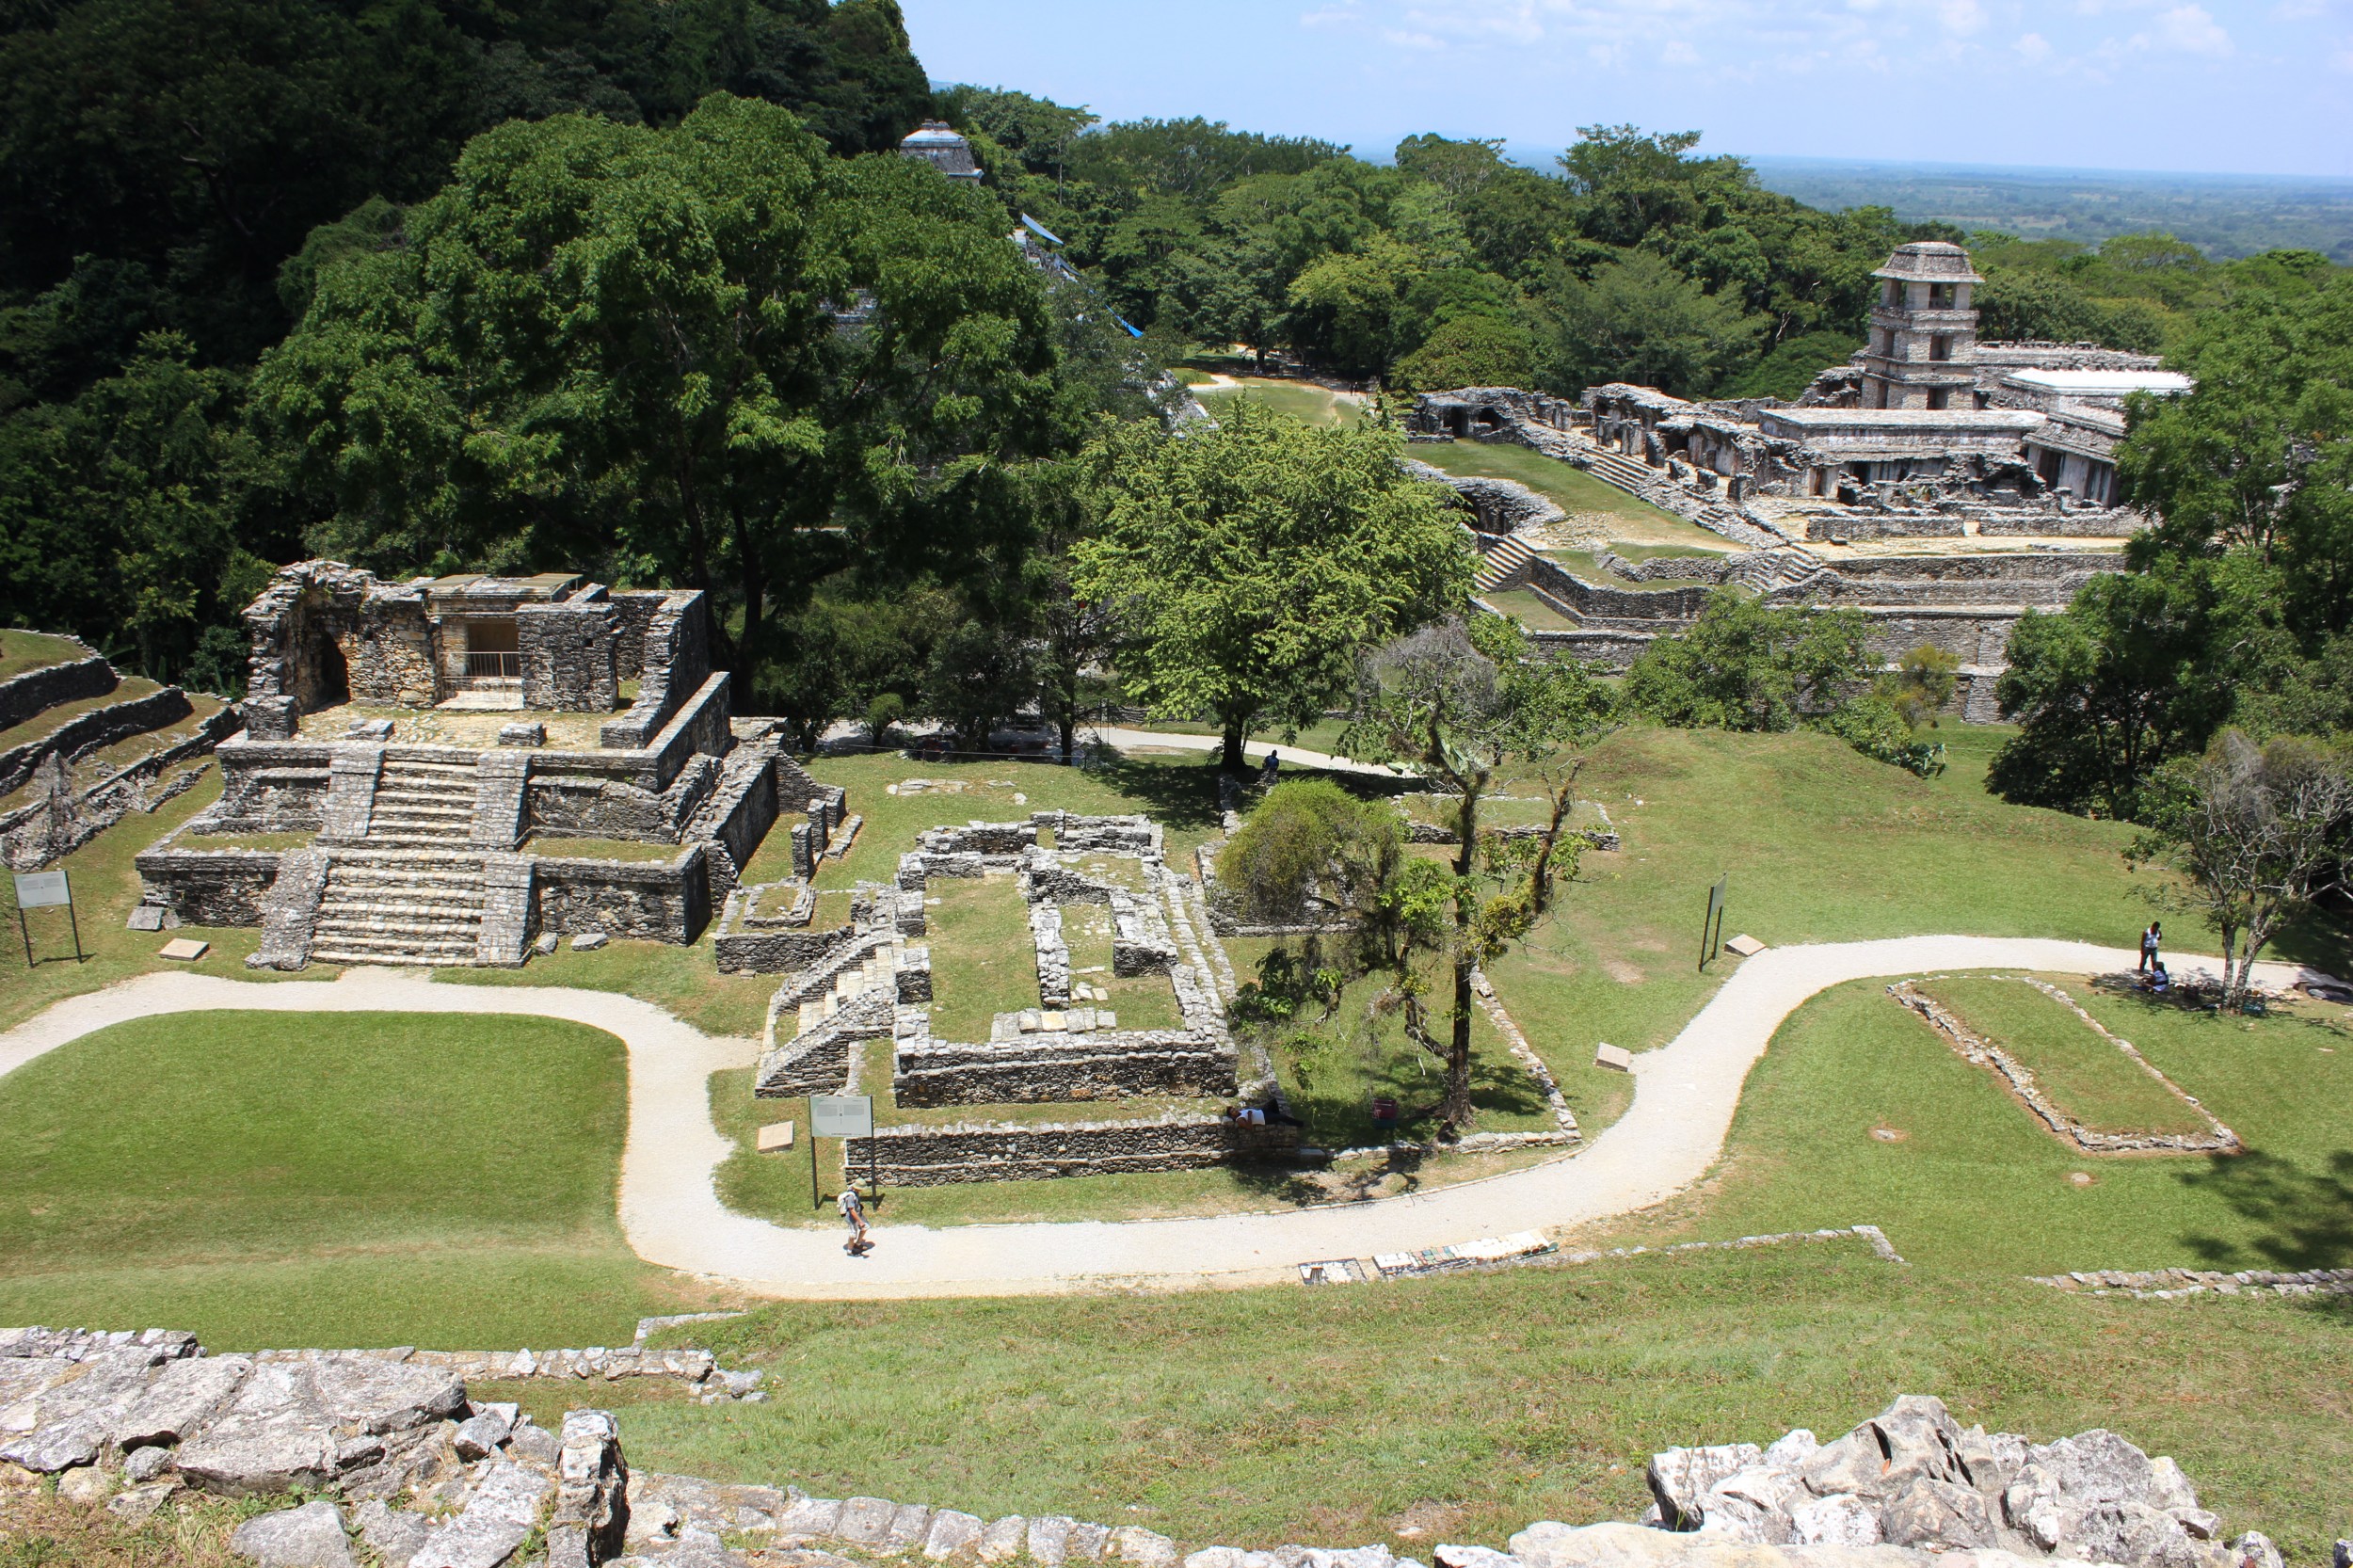 An overview of the ruins from the top of the Temple of the Sun. T.W. and Christina are under the tree there on the right.